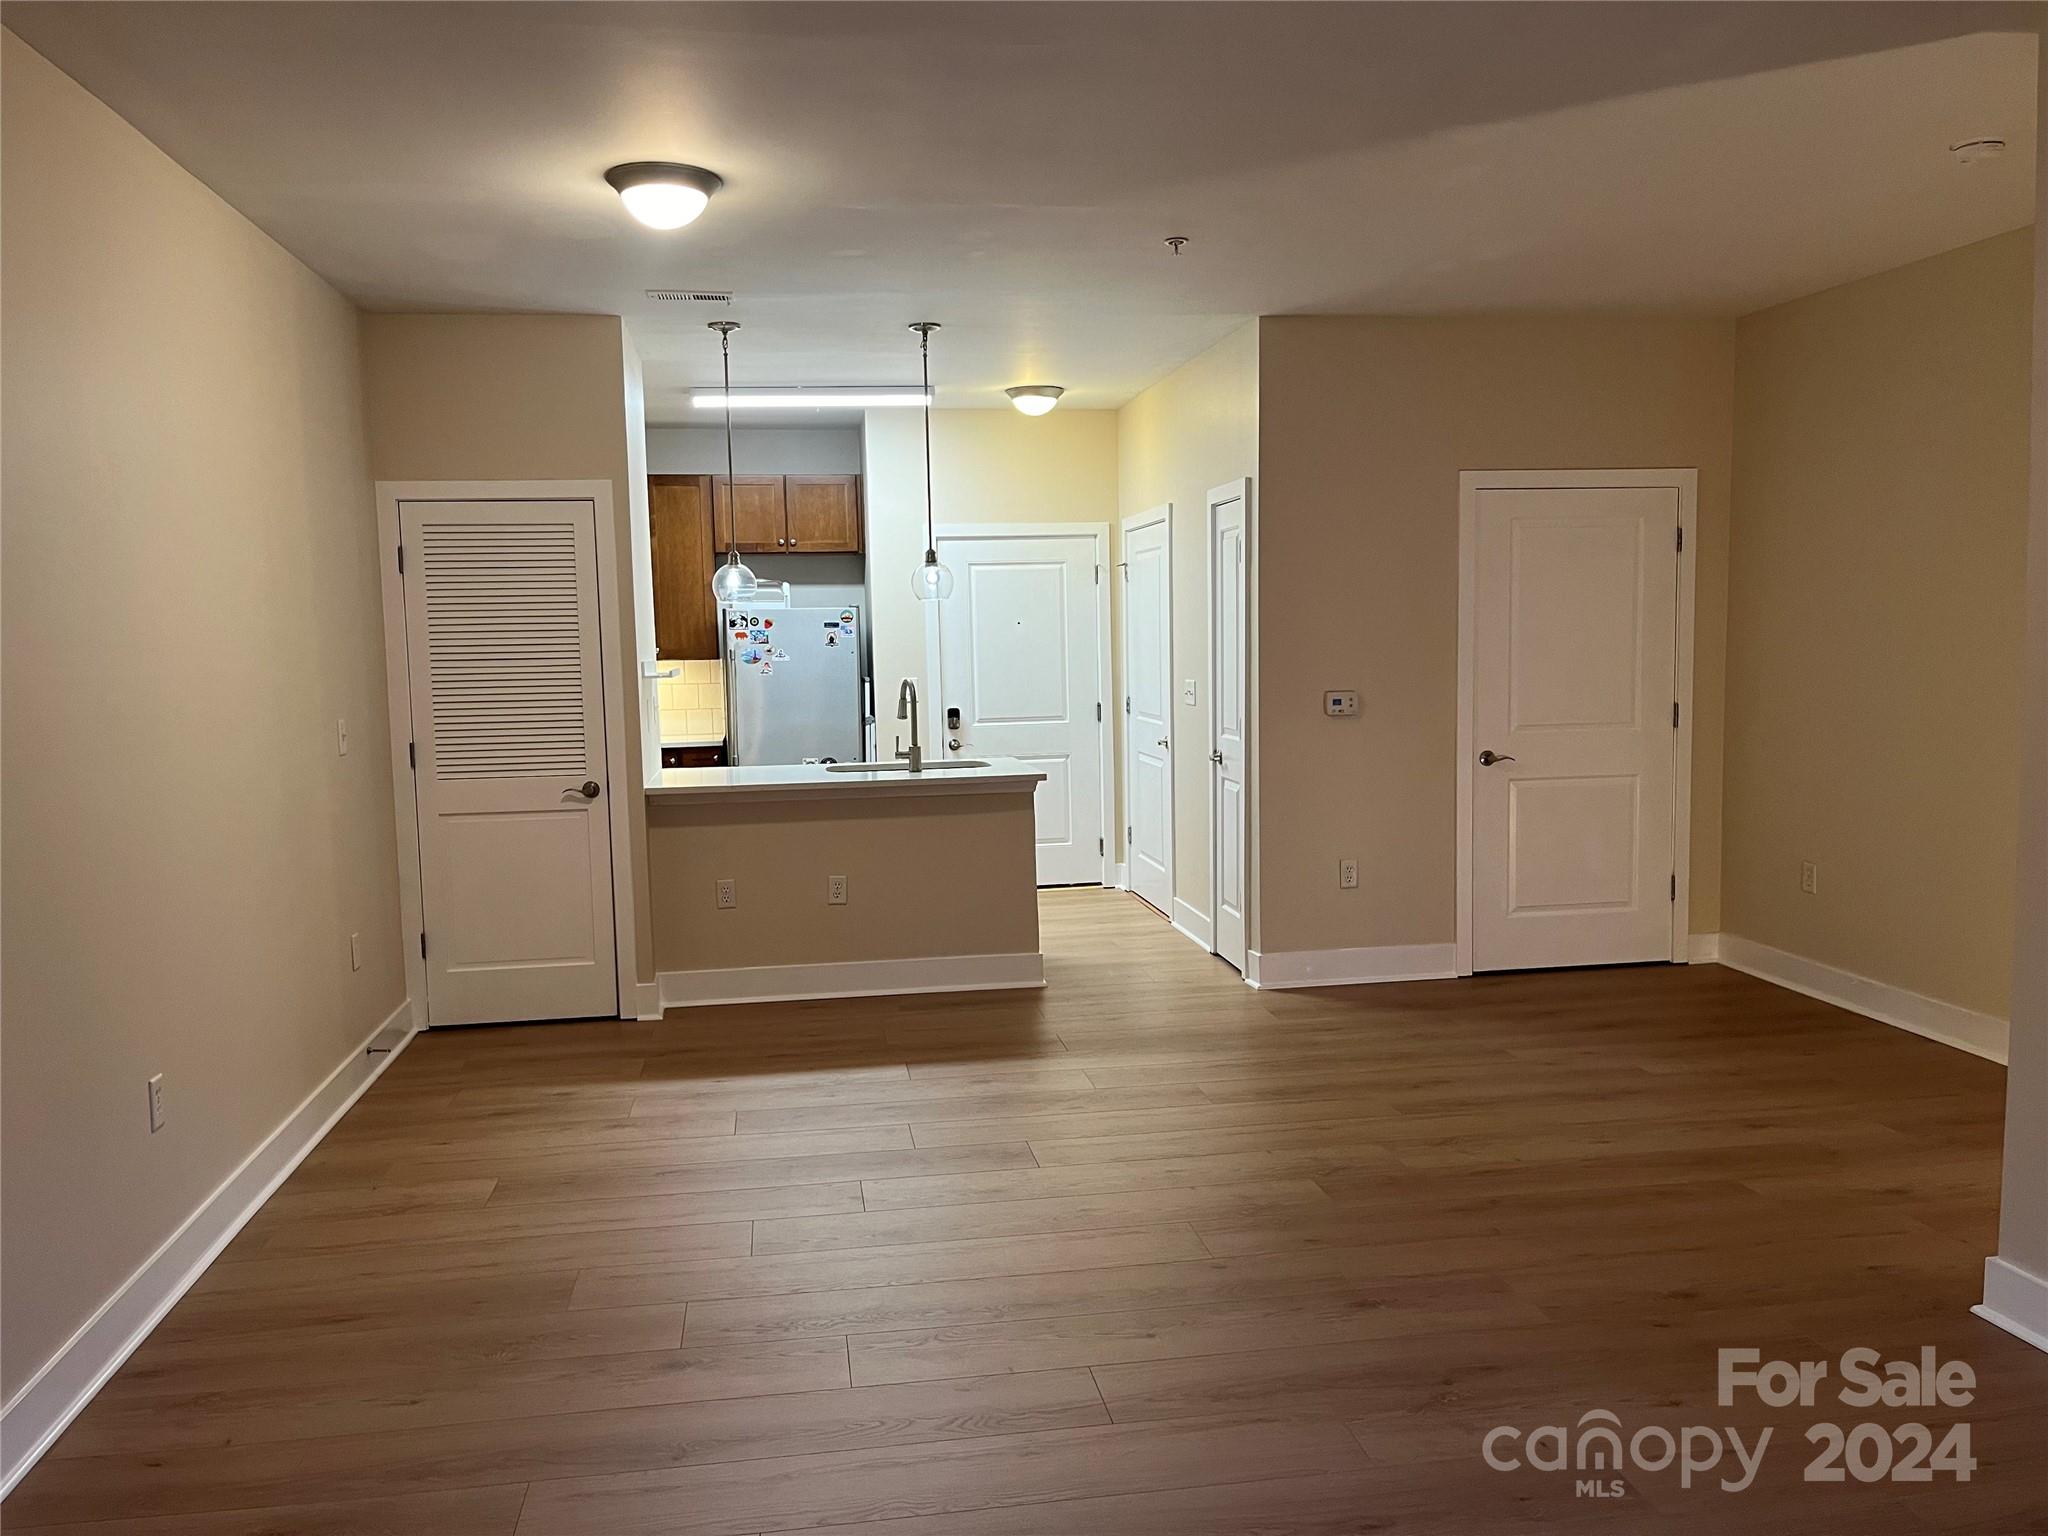 a view of a kitchen cabinets and wooden floor